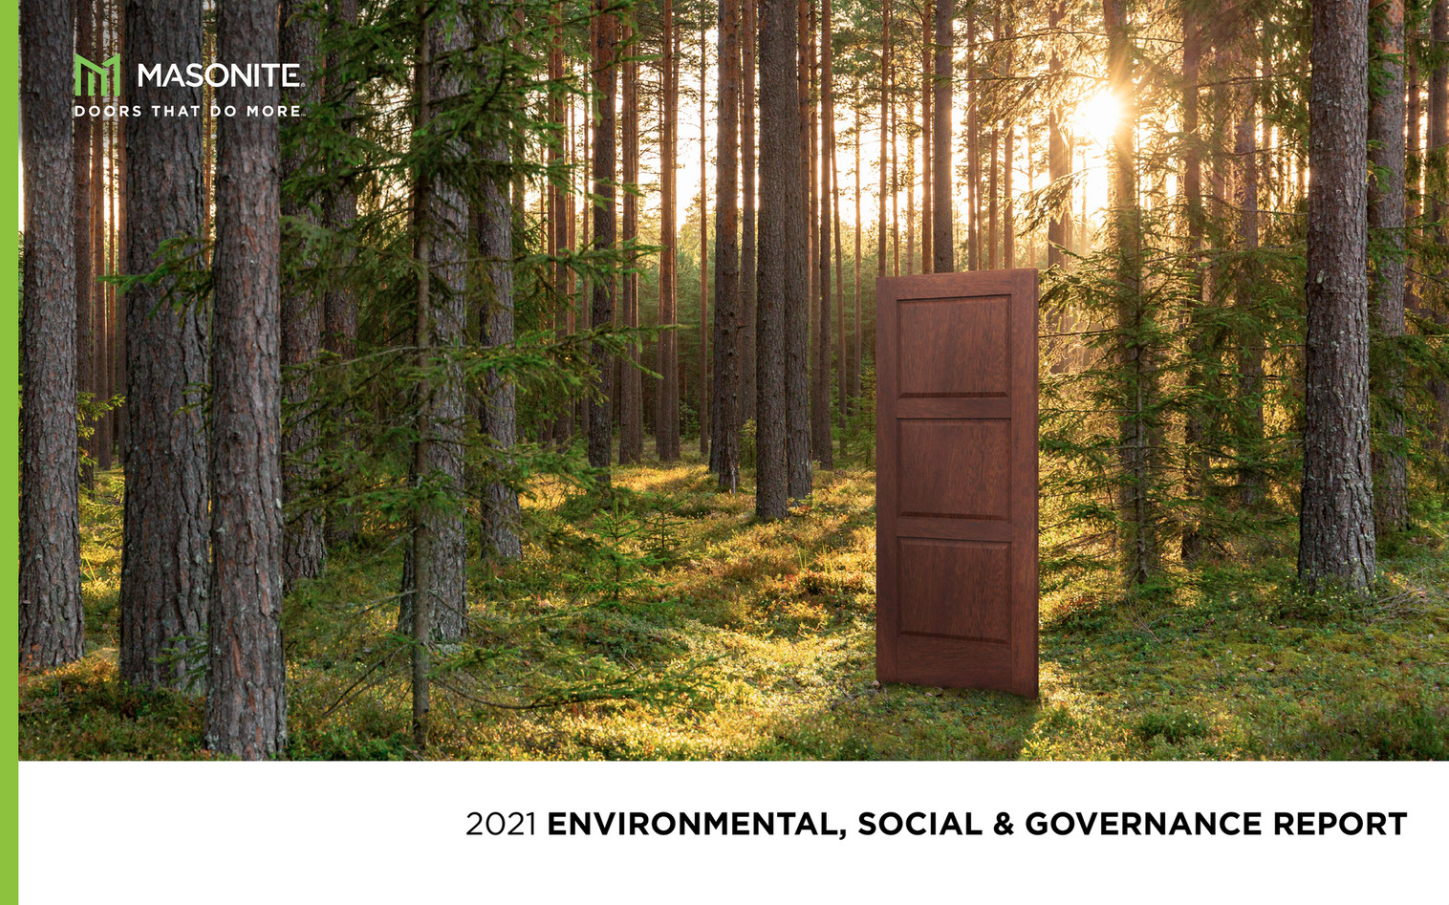 forest with Masonite logo and "2021 Environmental, Social & Governance Report"